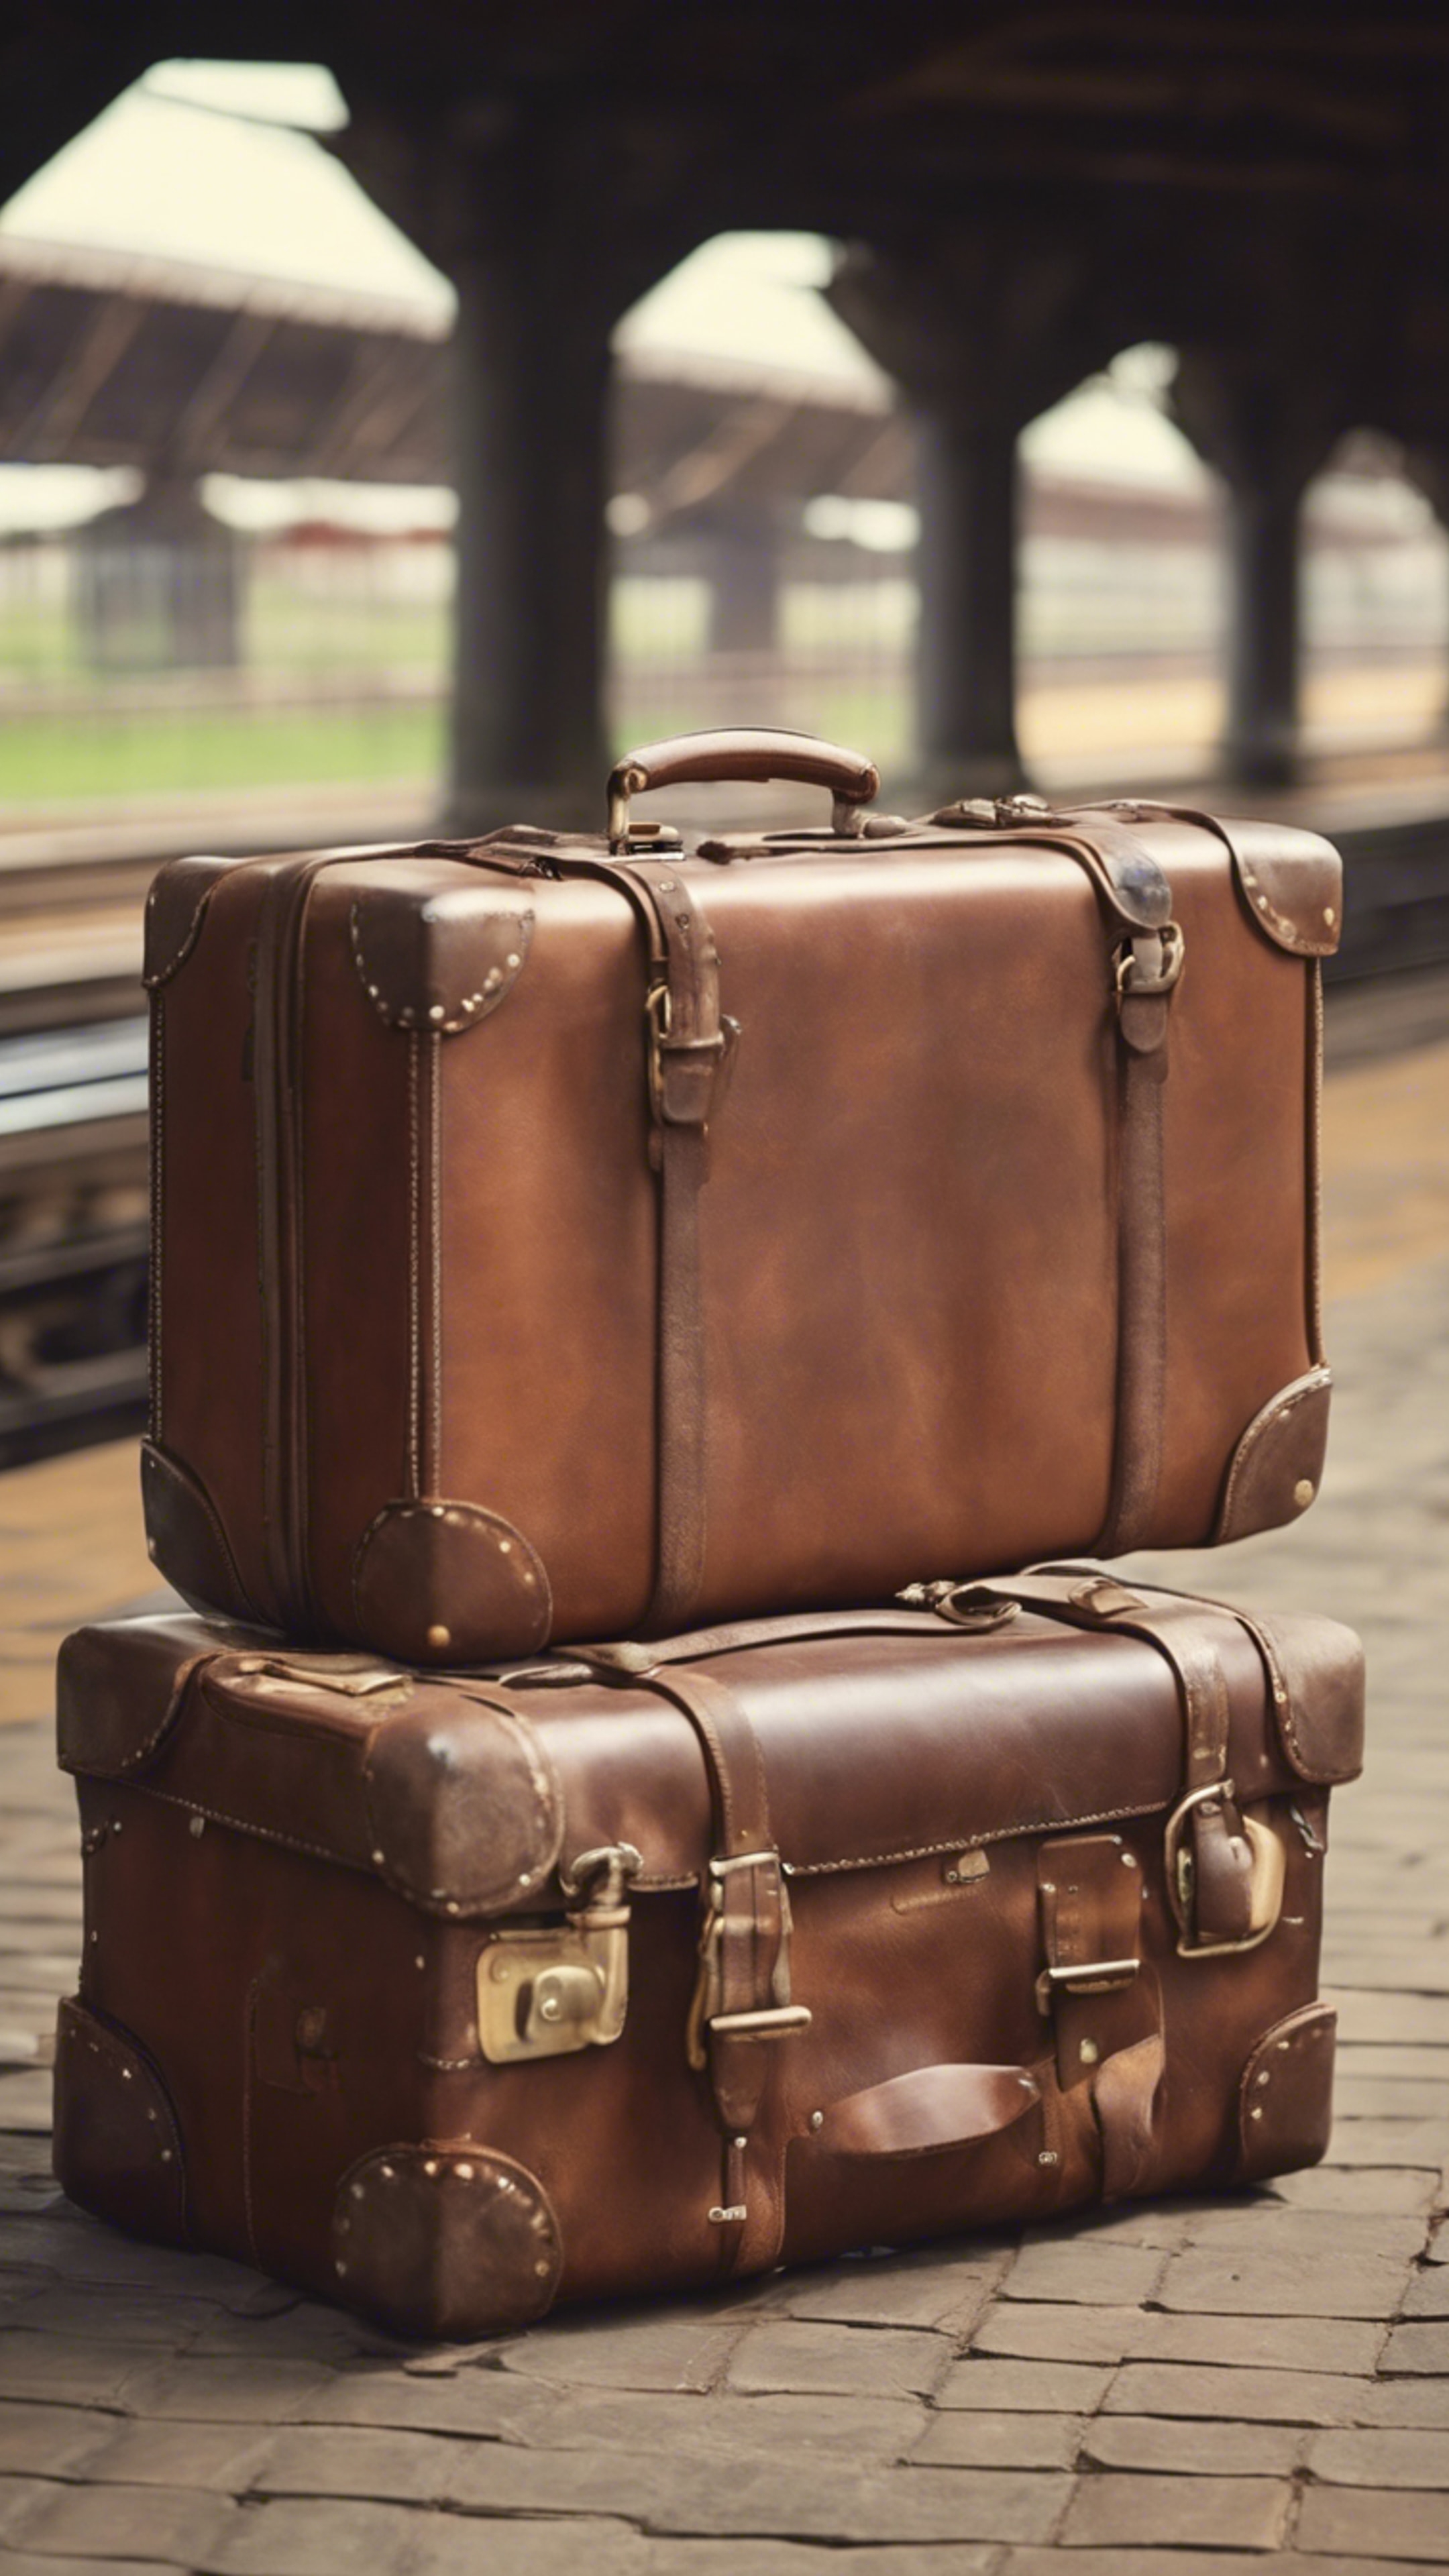 A rustic brown leather suitcase with travel tags, sitting at a quaint railway station. ផ្ទាំង​រូបភាព[6b7e956de06740cdbd0e]